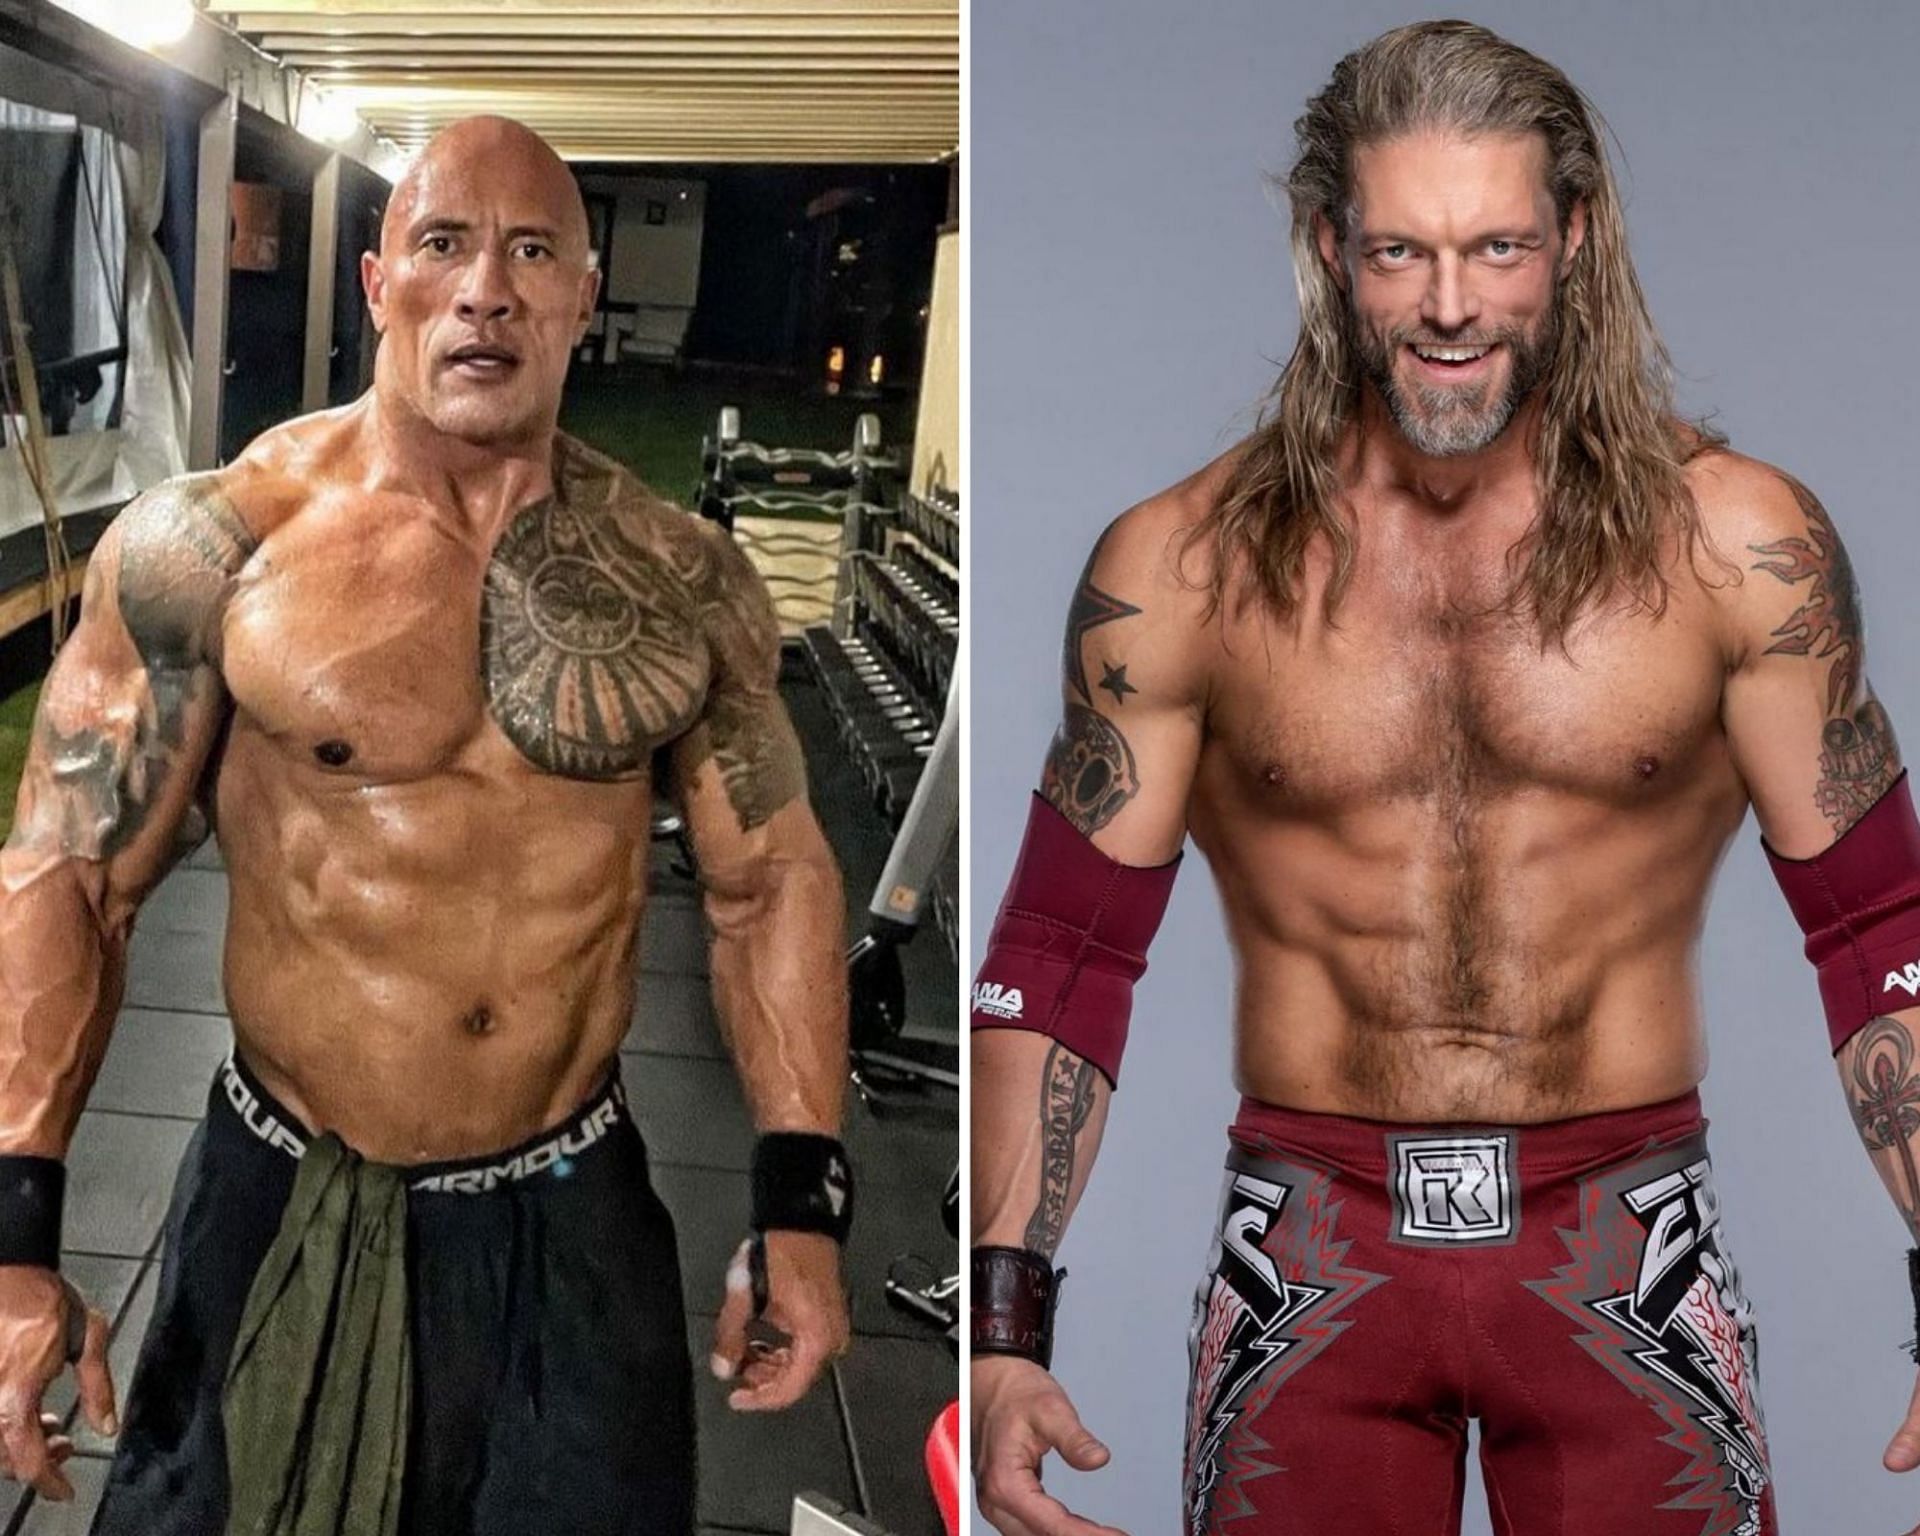 Edge and The Rock are still in fantastic shape even 20 years after SummerSlam 2002!